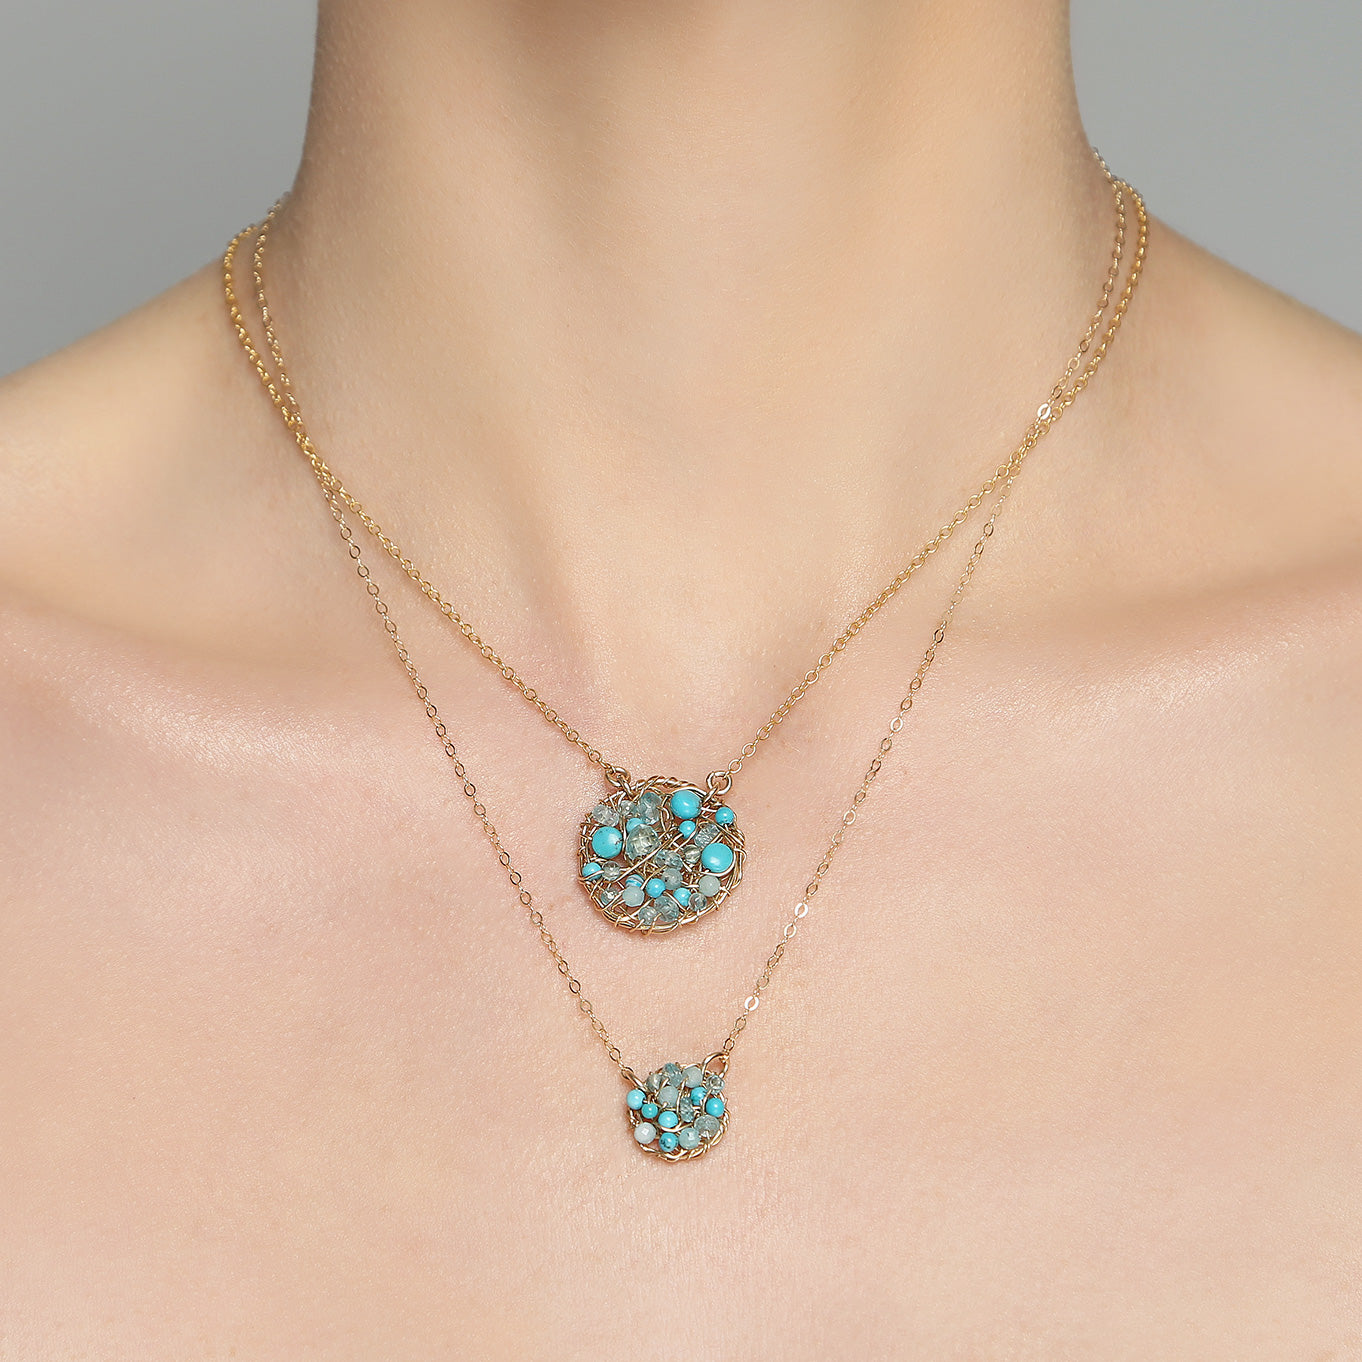 Aura Necklace #2 (20mm) - Turquoise Mix Gems Necklaces TARBAY   